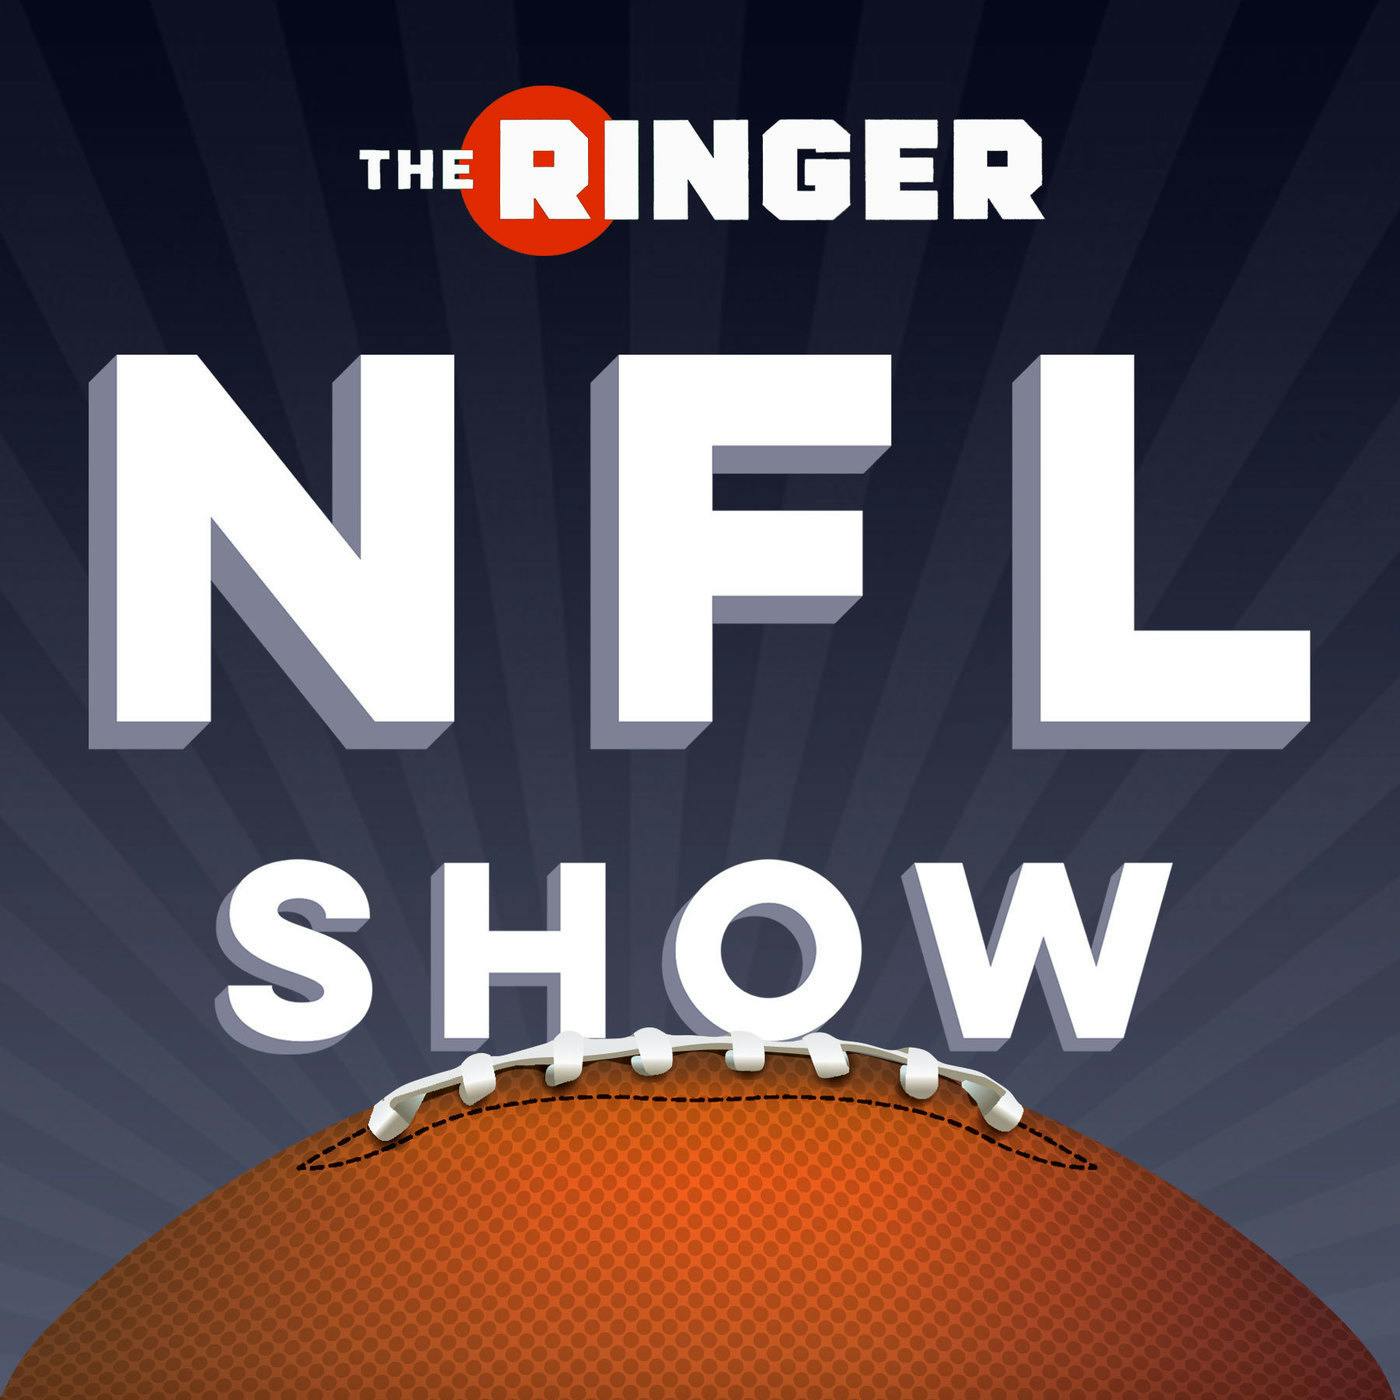 The Best Games From the 2020 NFL Schedule  | The Ringer NFL Show